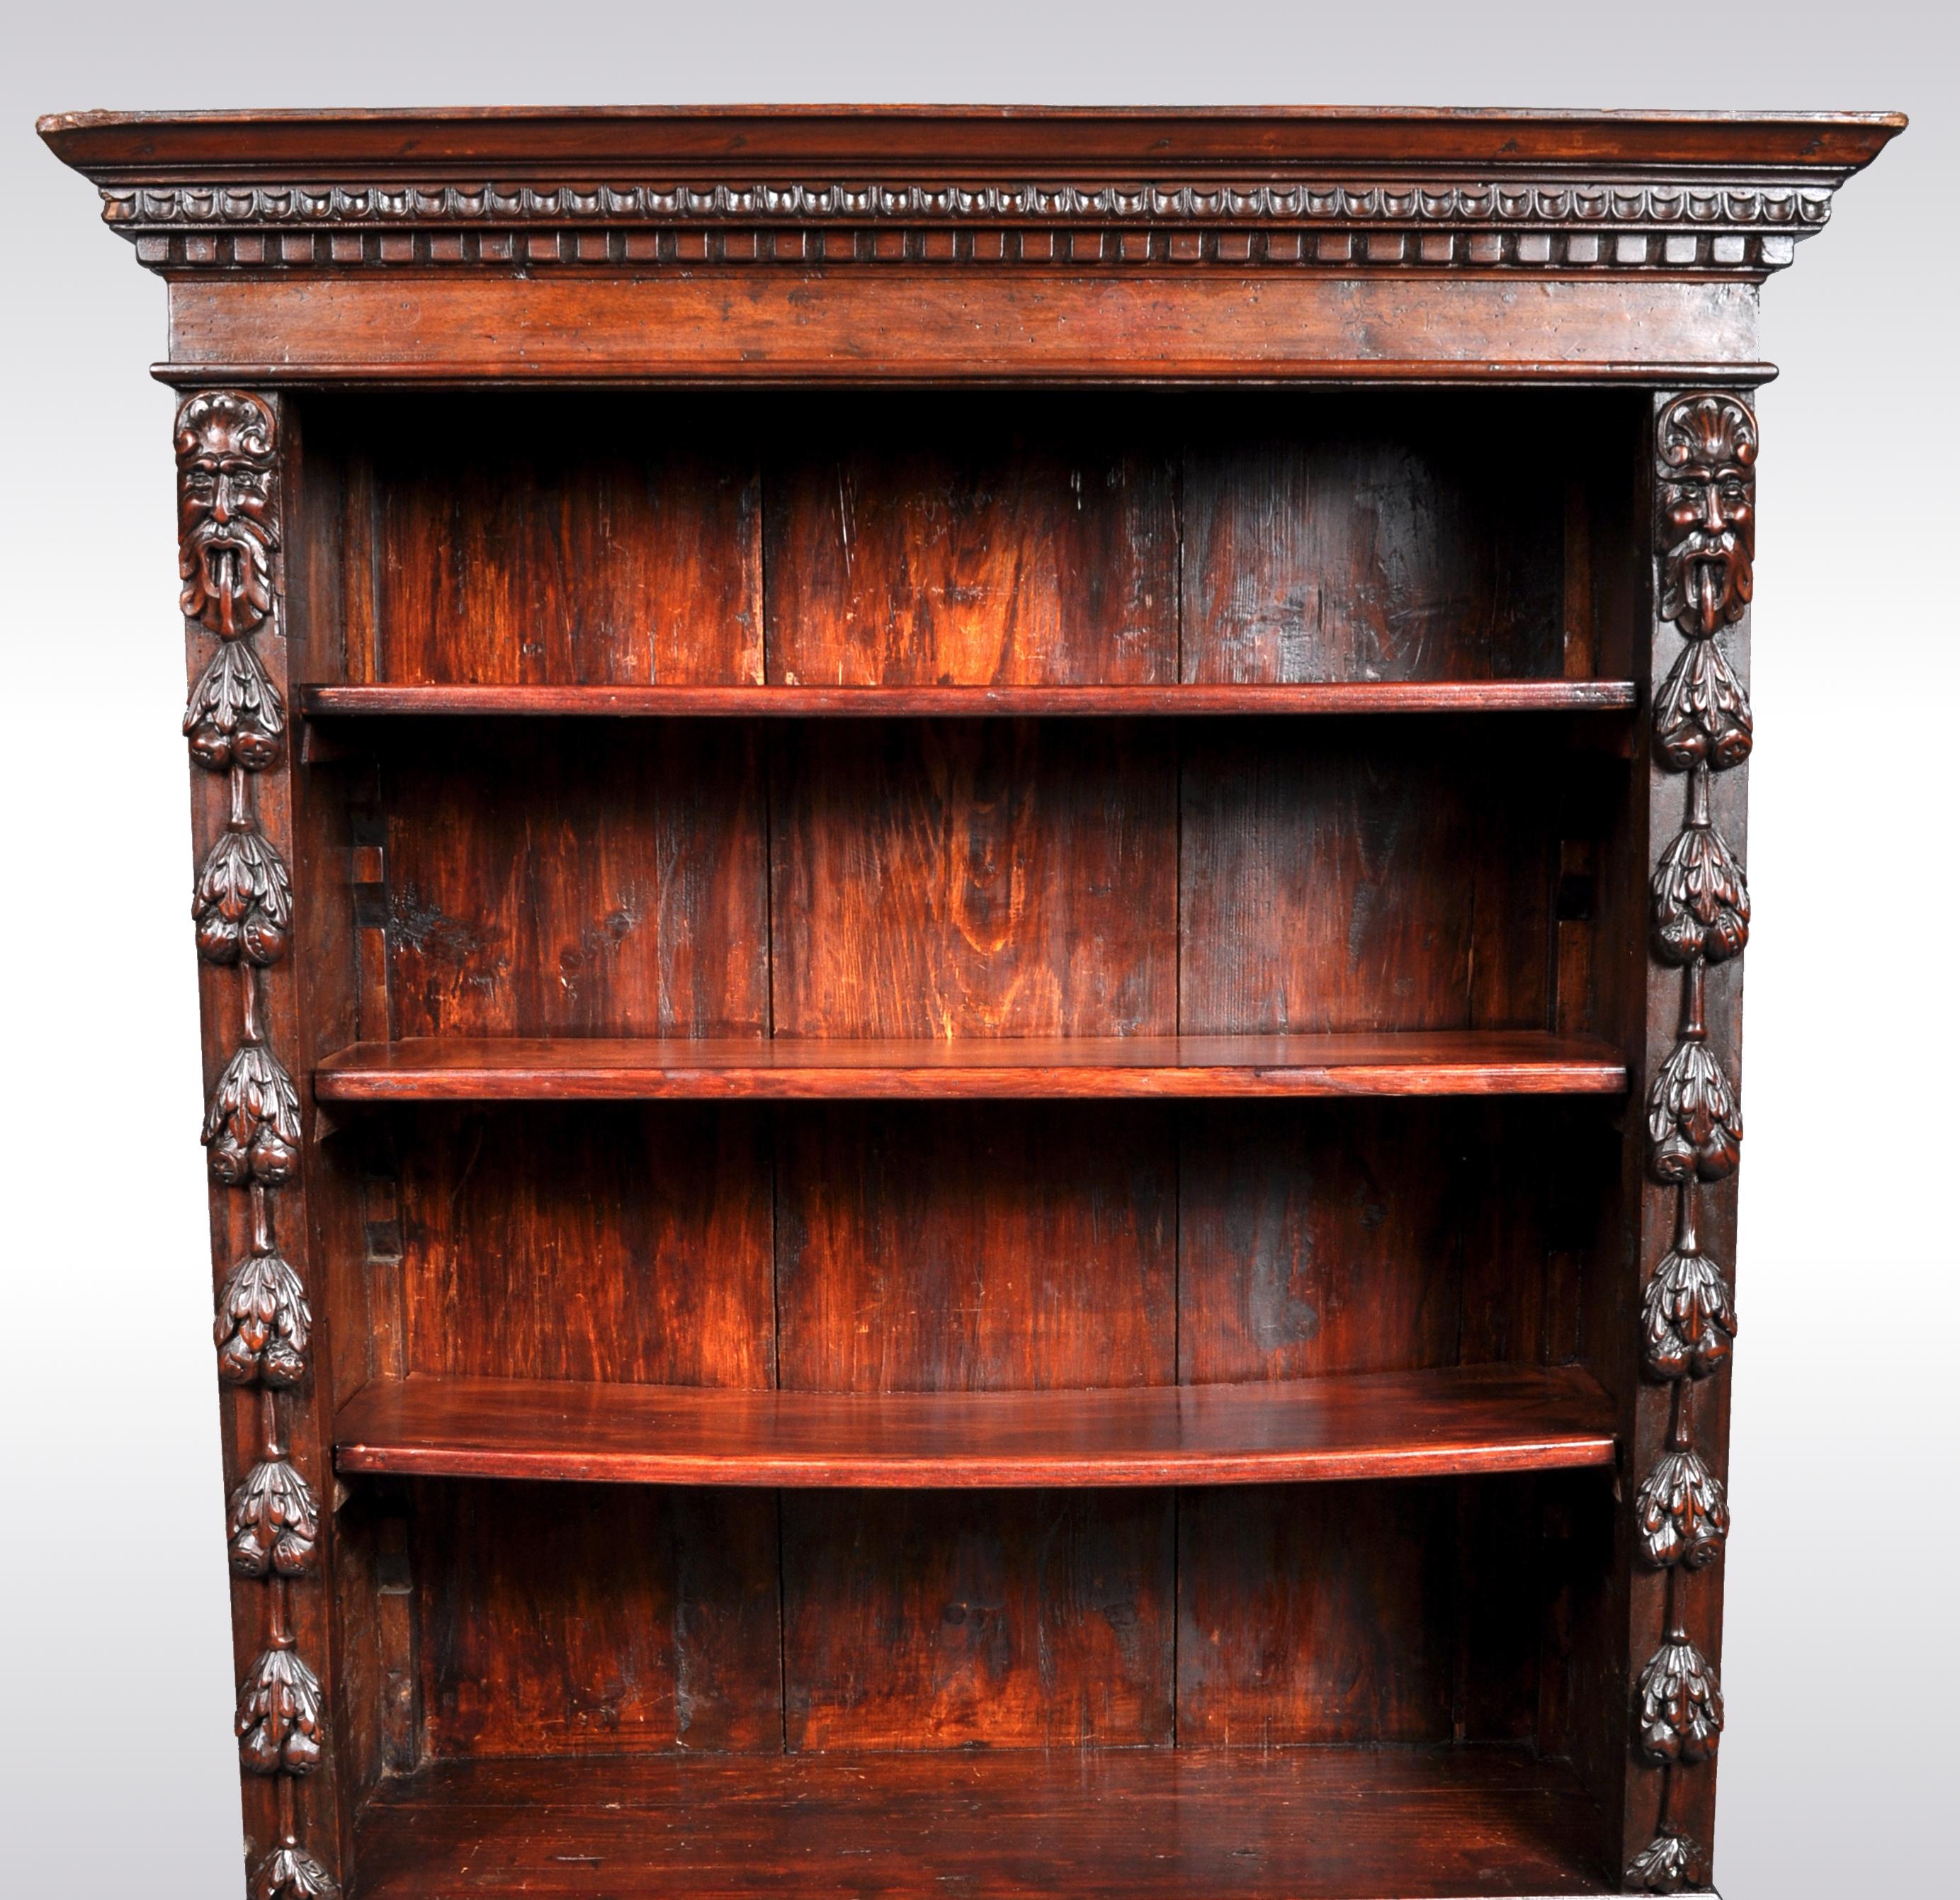 Hand-Carved Antique Italian Carved Walnut Renaissance Revival Bookcase, circa 1870